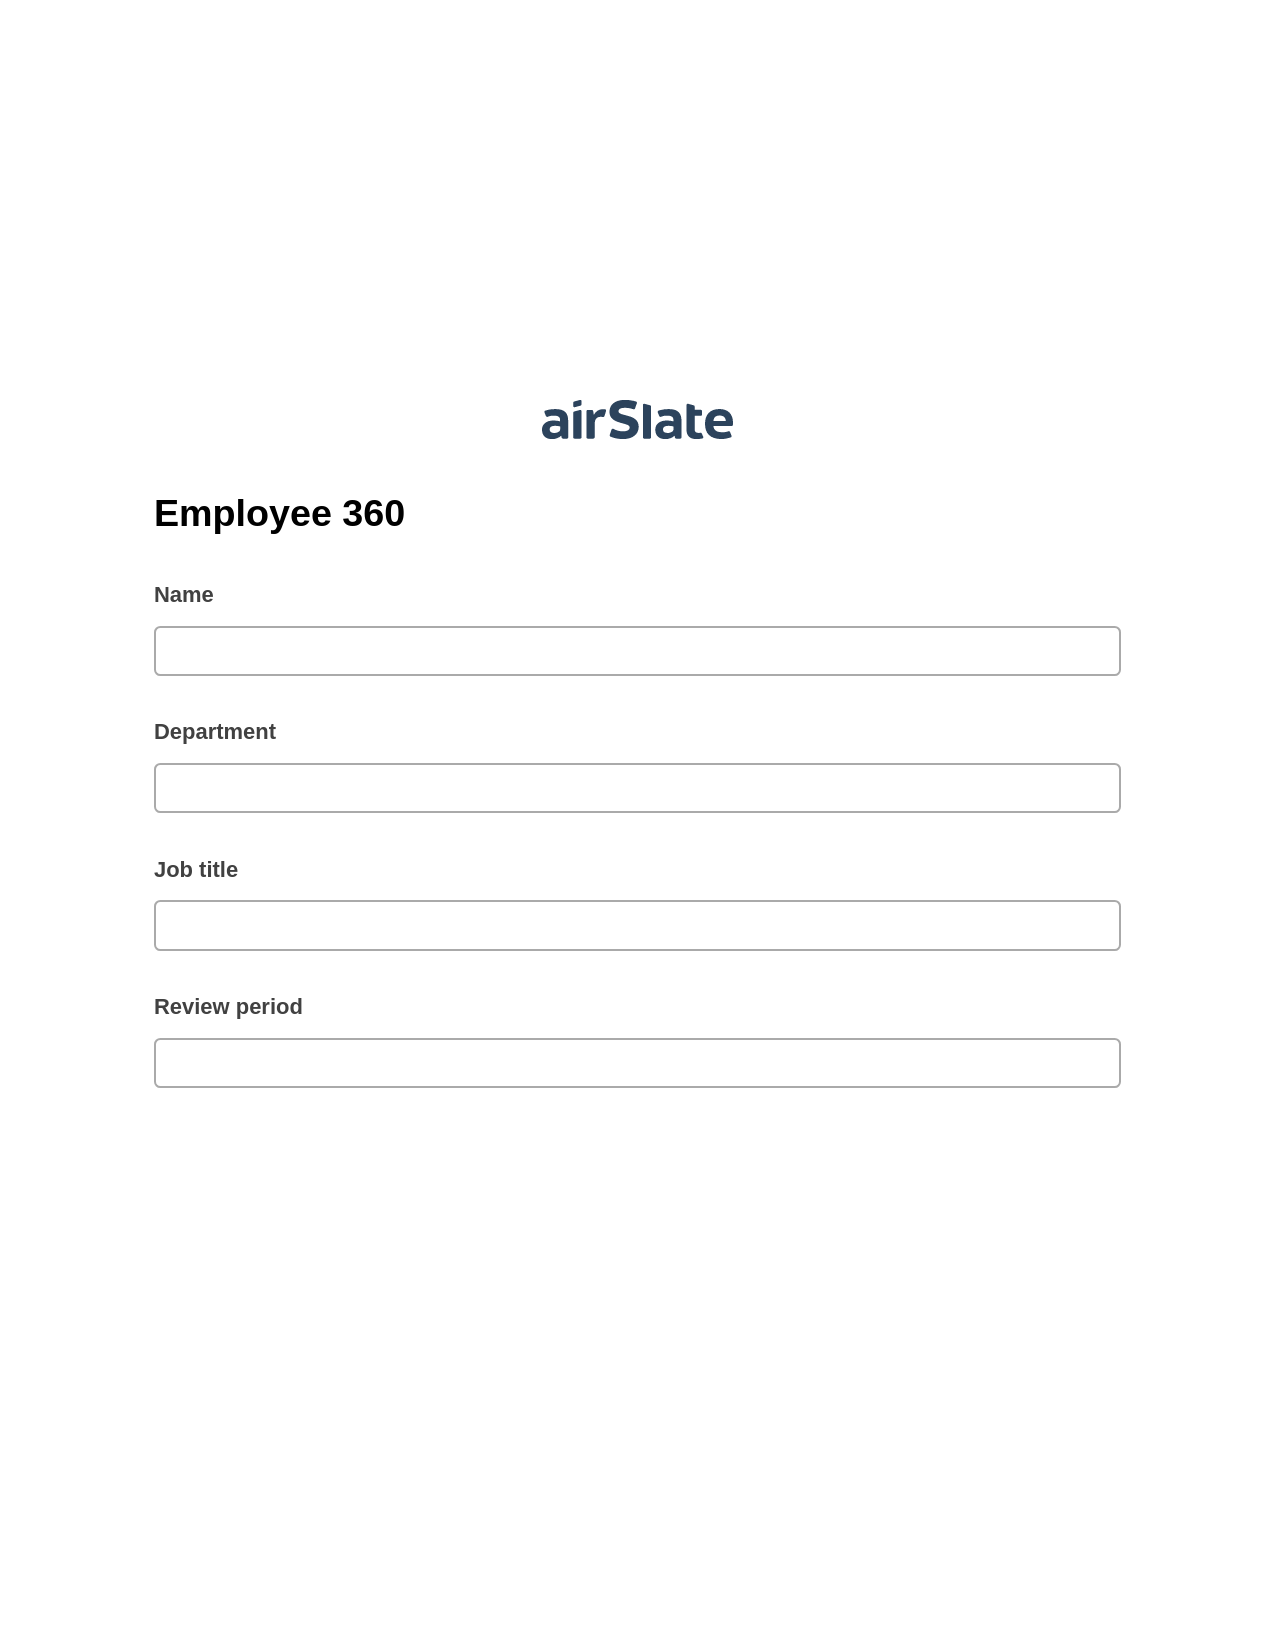 Employee 360 Pre-fill Document Bot, Reminder Bot, Archive to SharePoint Folder Bot